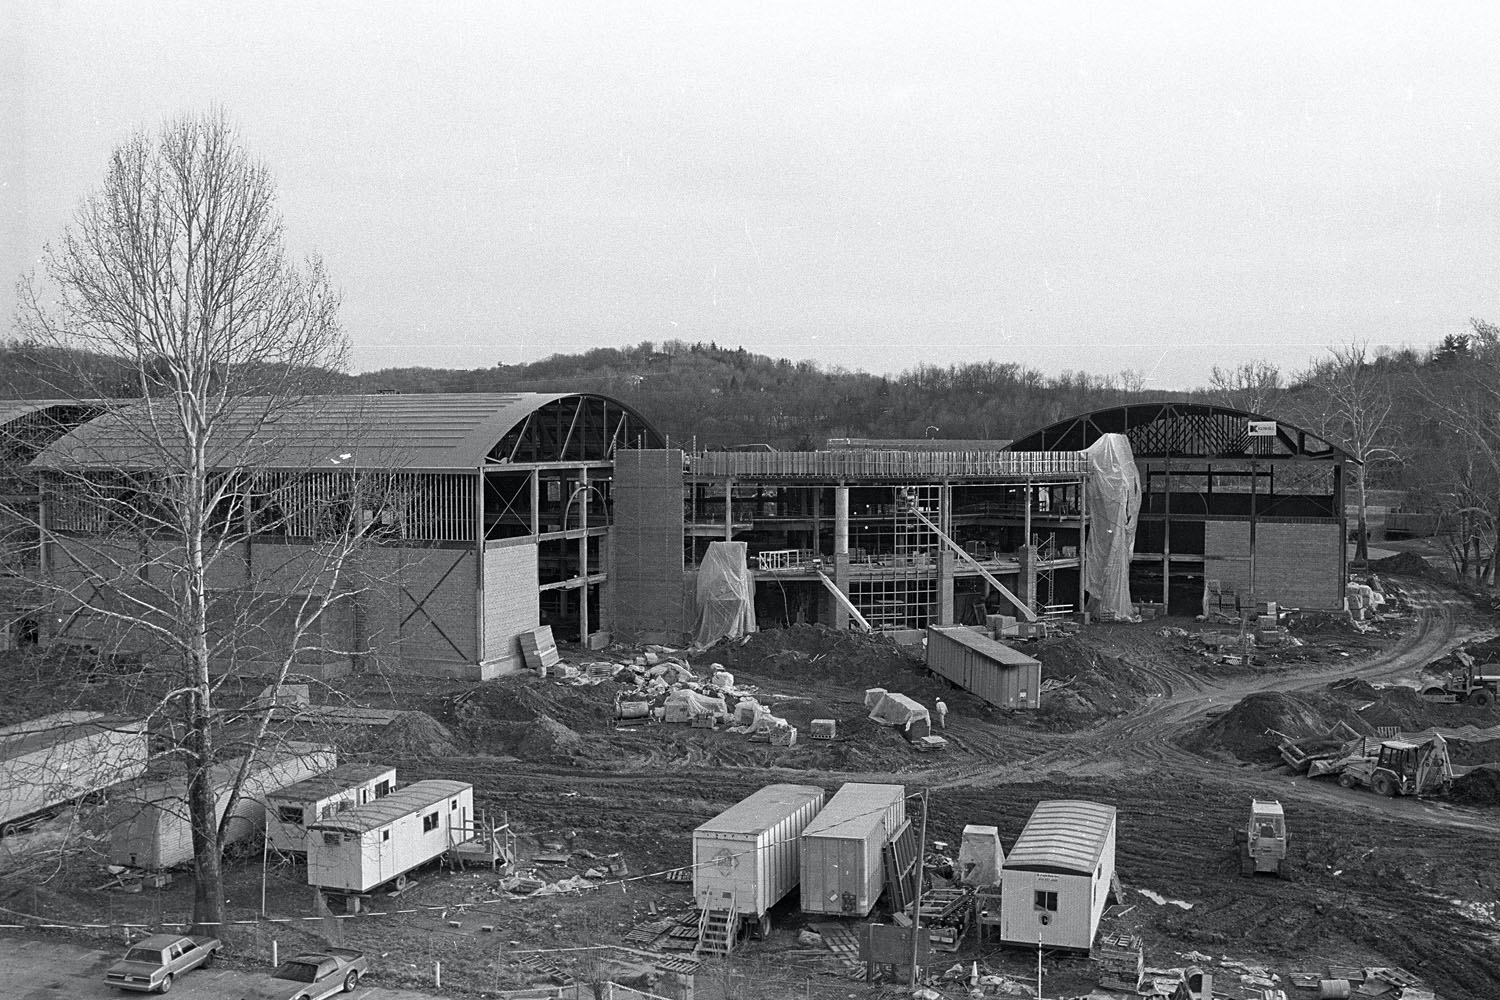 The Ping Center is under construction in this 1995 photo taken from atop Clippinger Laboratories. Photo courtesy of the Mahn Center for Archives & Special Collections